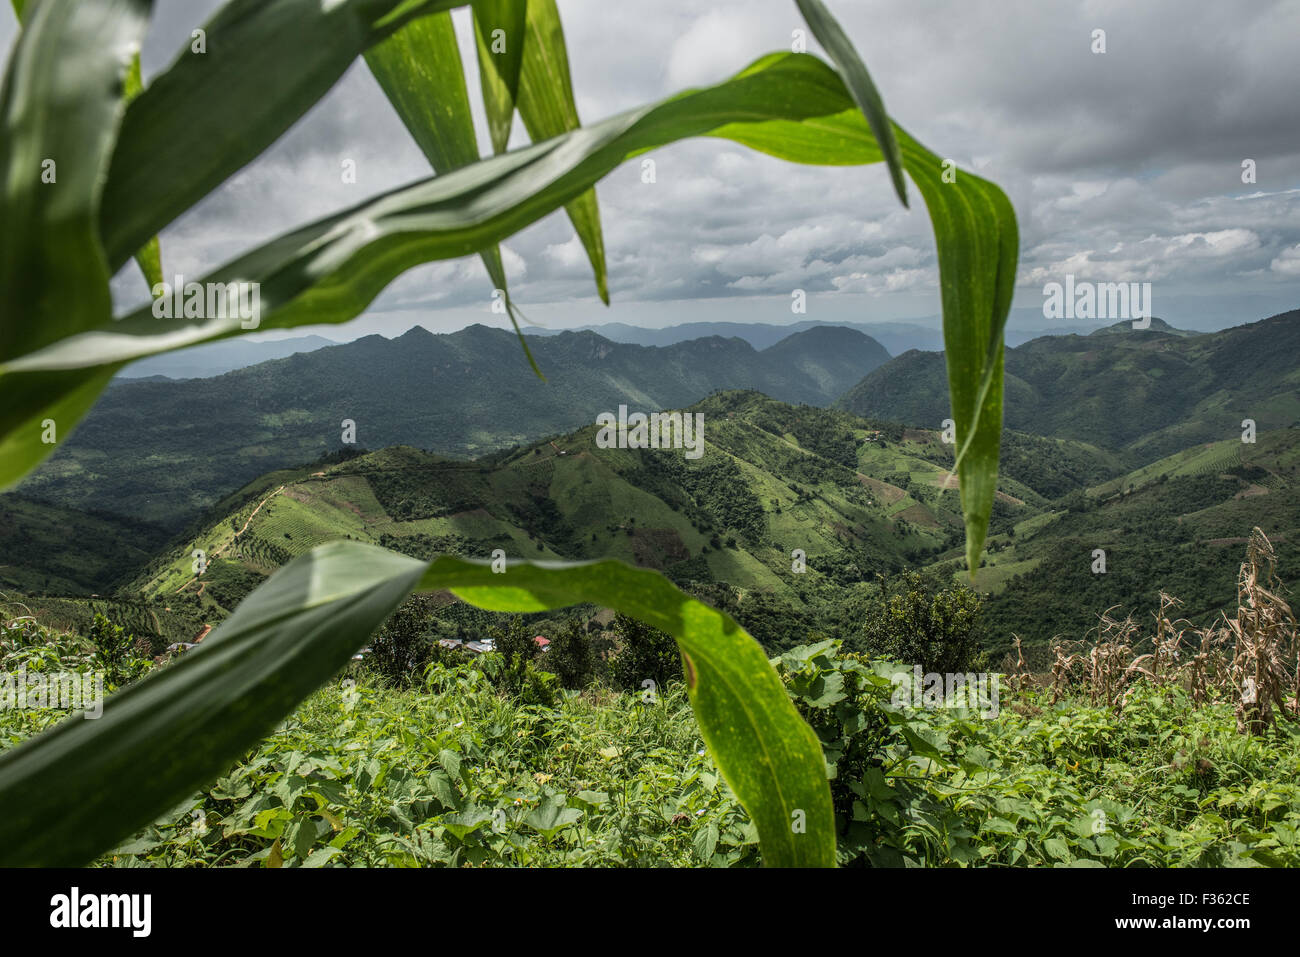 Mountain scenery outside Kalaw, in Shan State, Myanmar Stock Photo